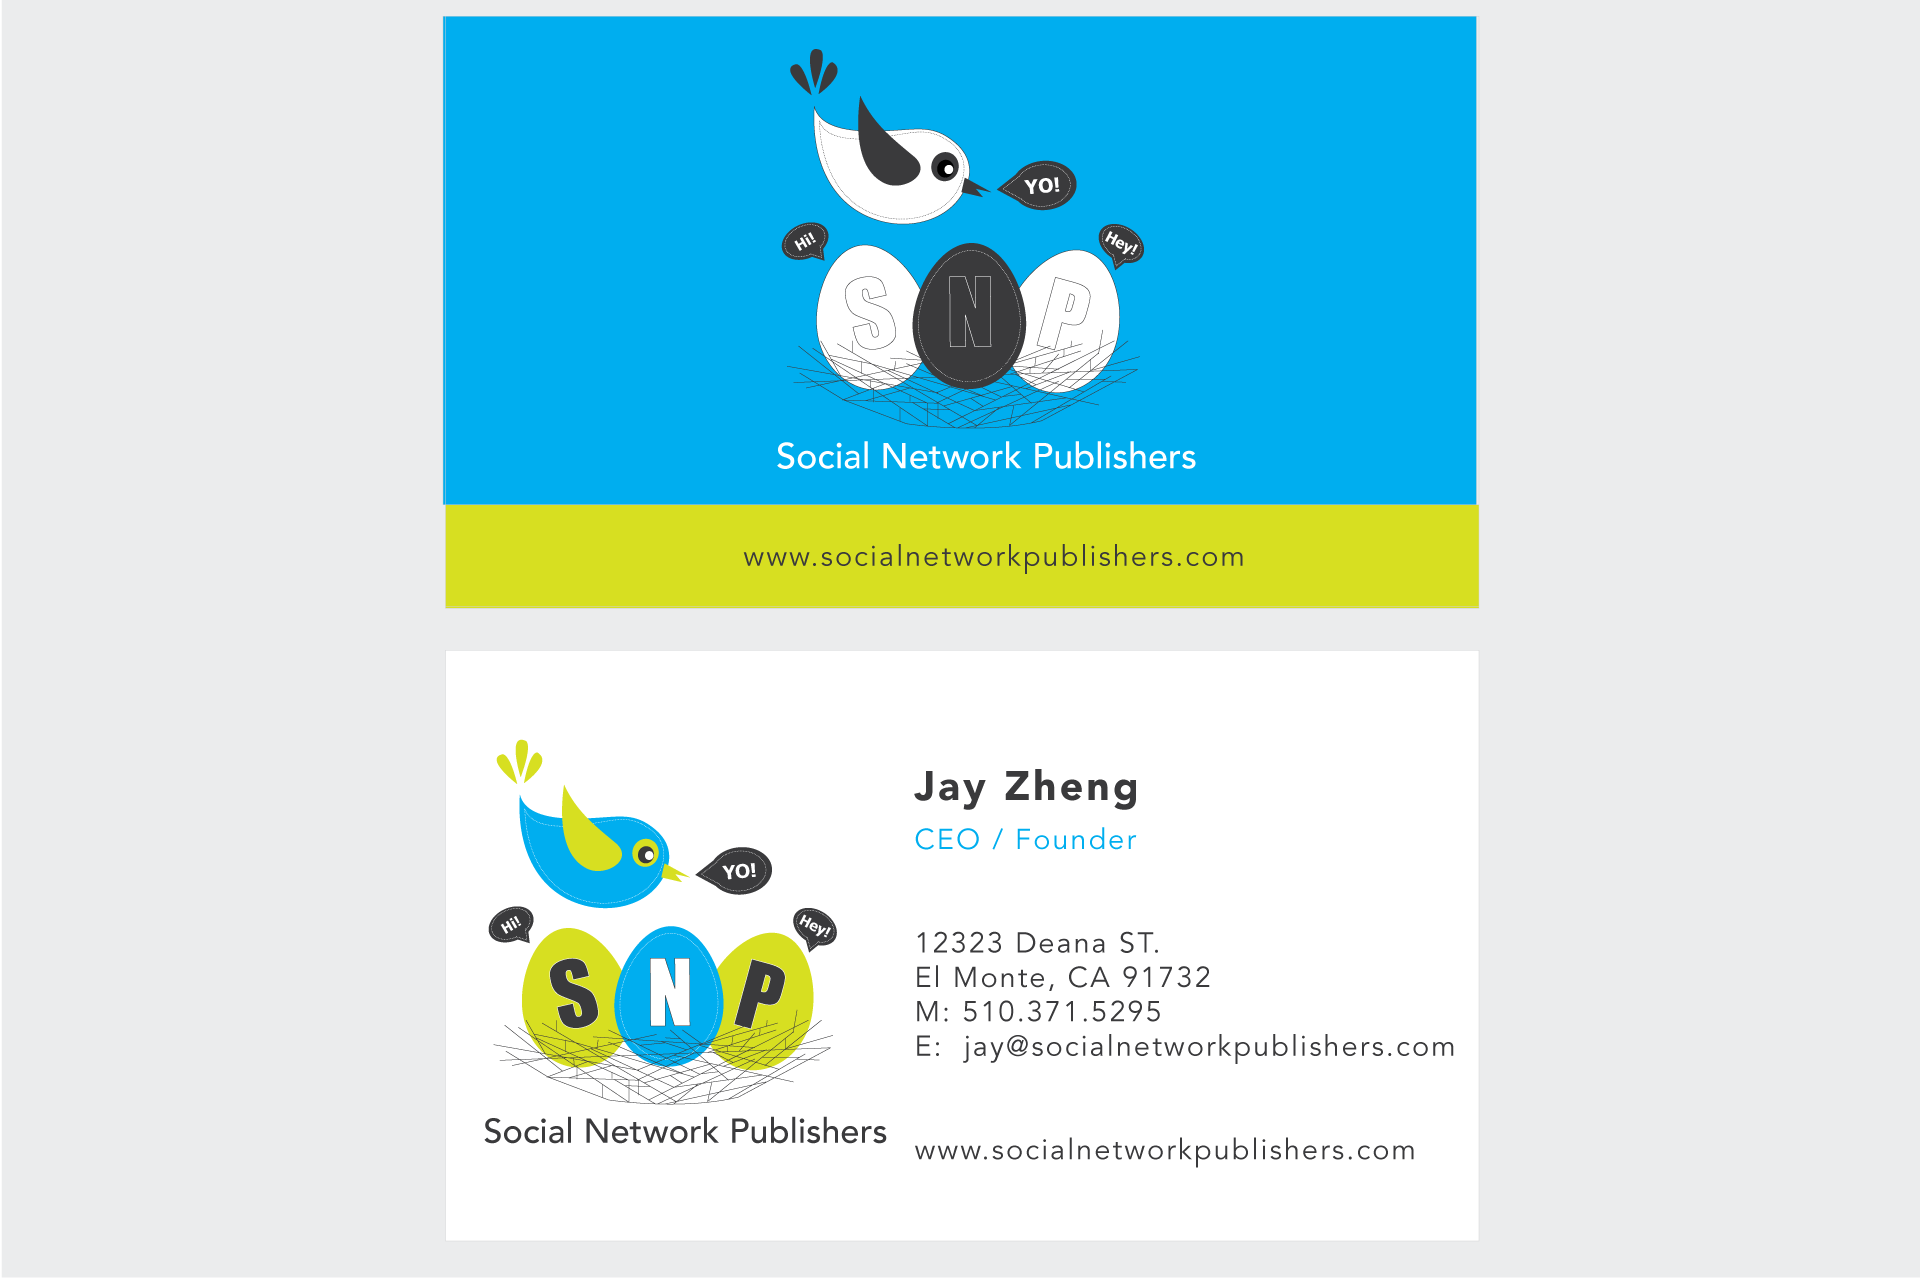 Social Network Publisher - Logo and Business Card Design